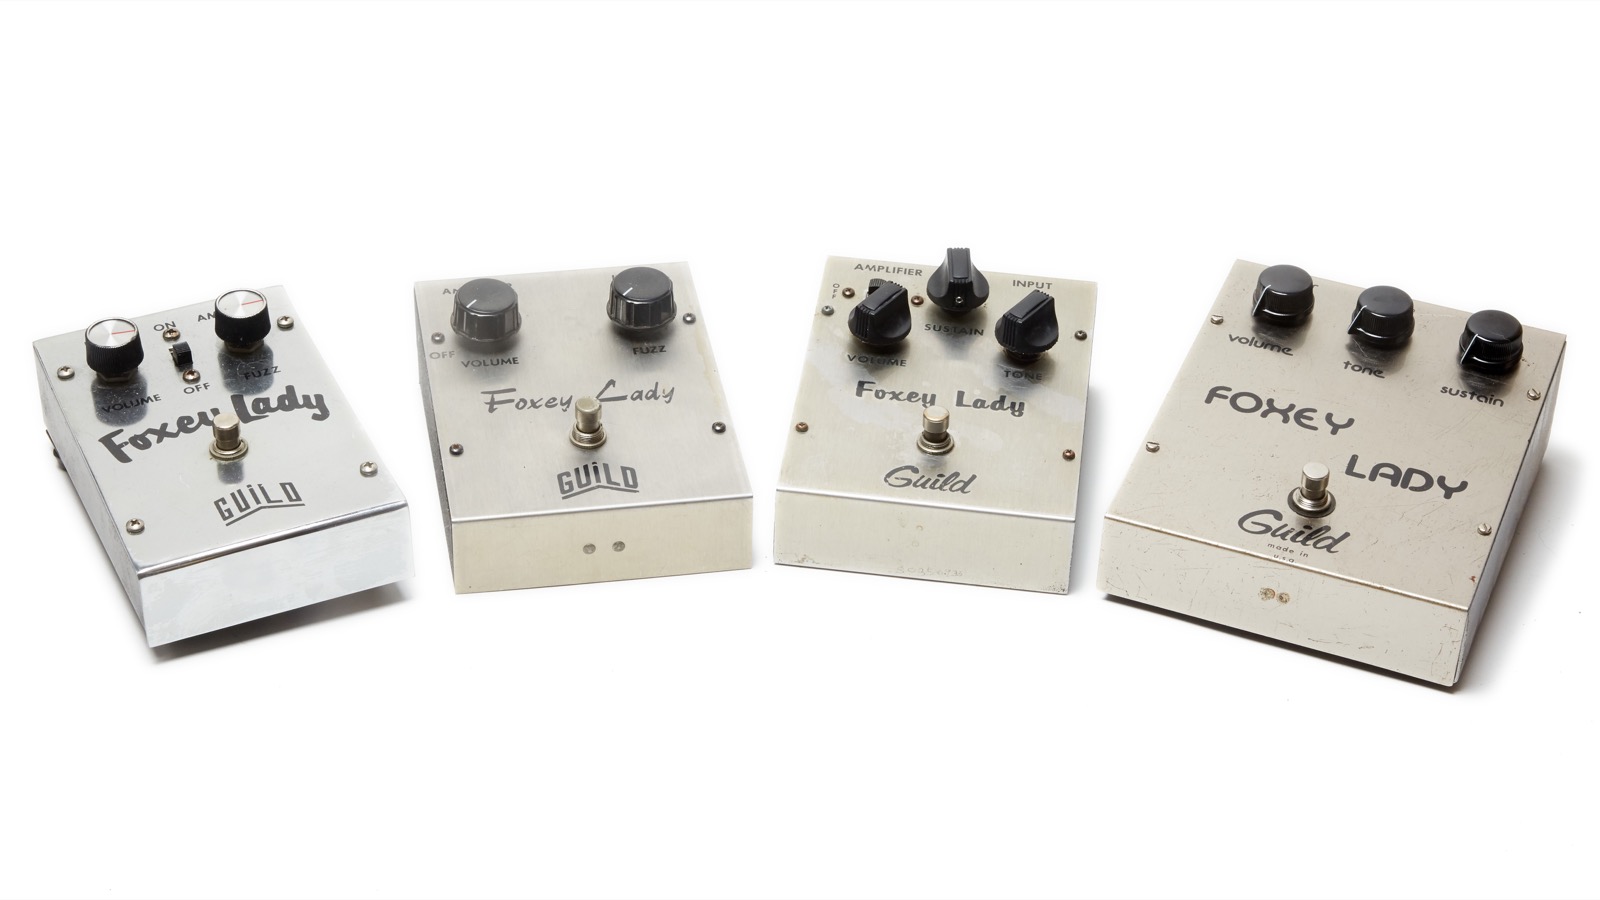 Guild-Four-Foxey-Lady-Pedals.jpg